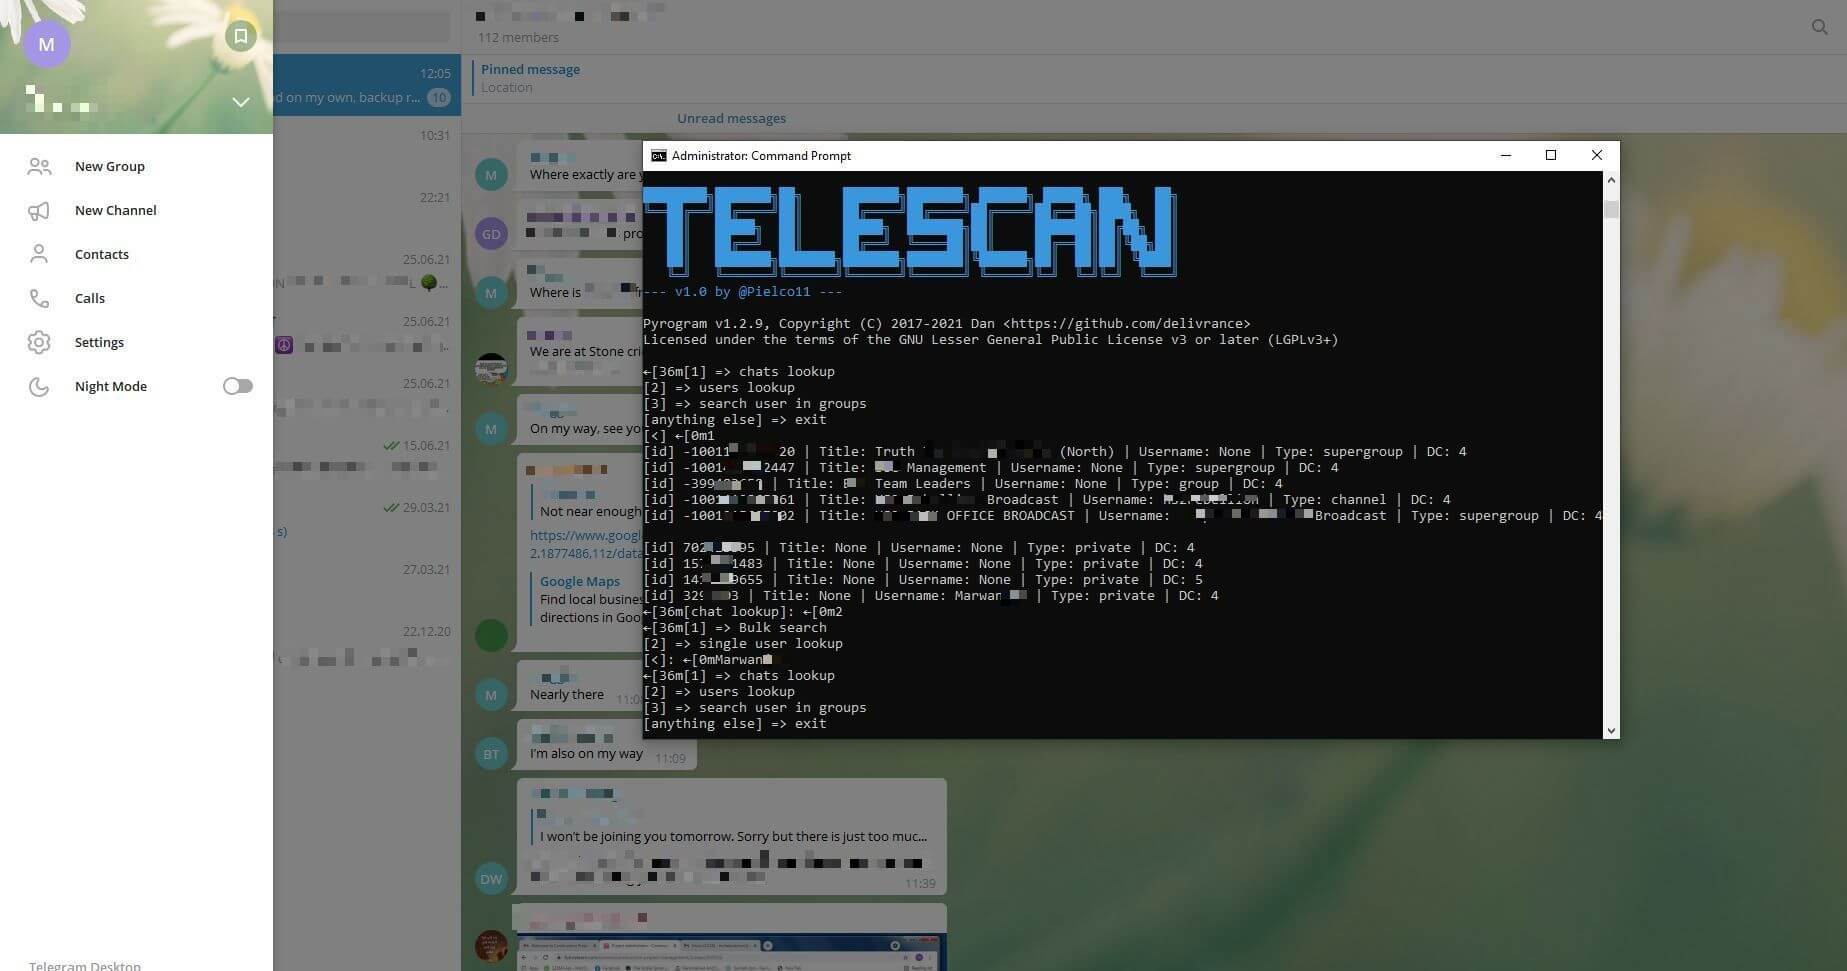 Investigating Telegram users and groups with Telescan